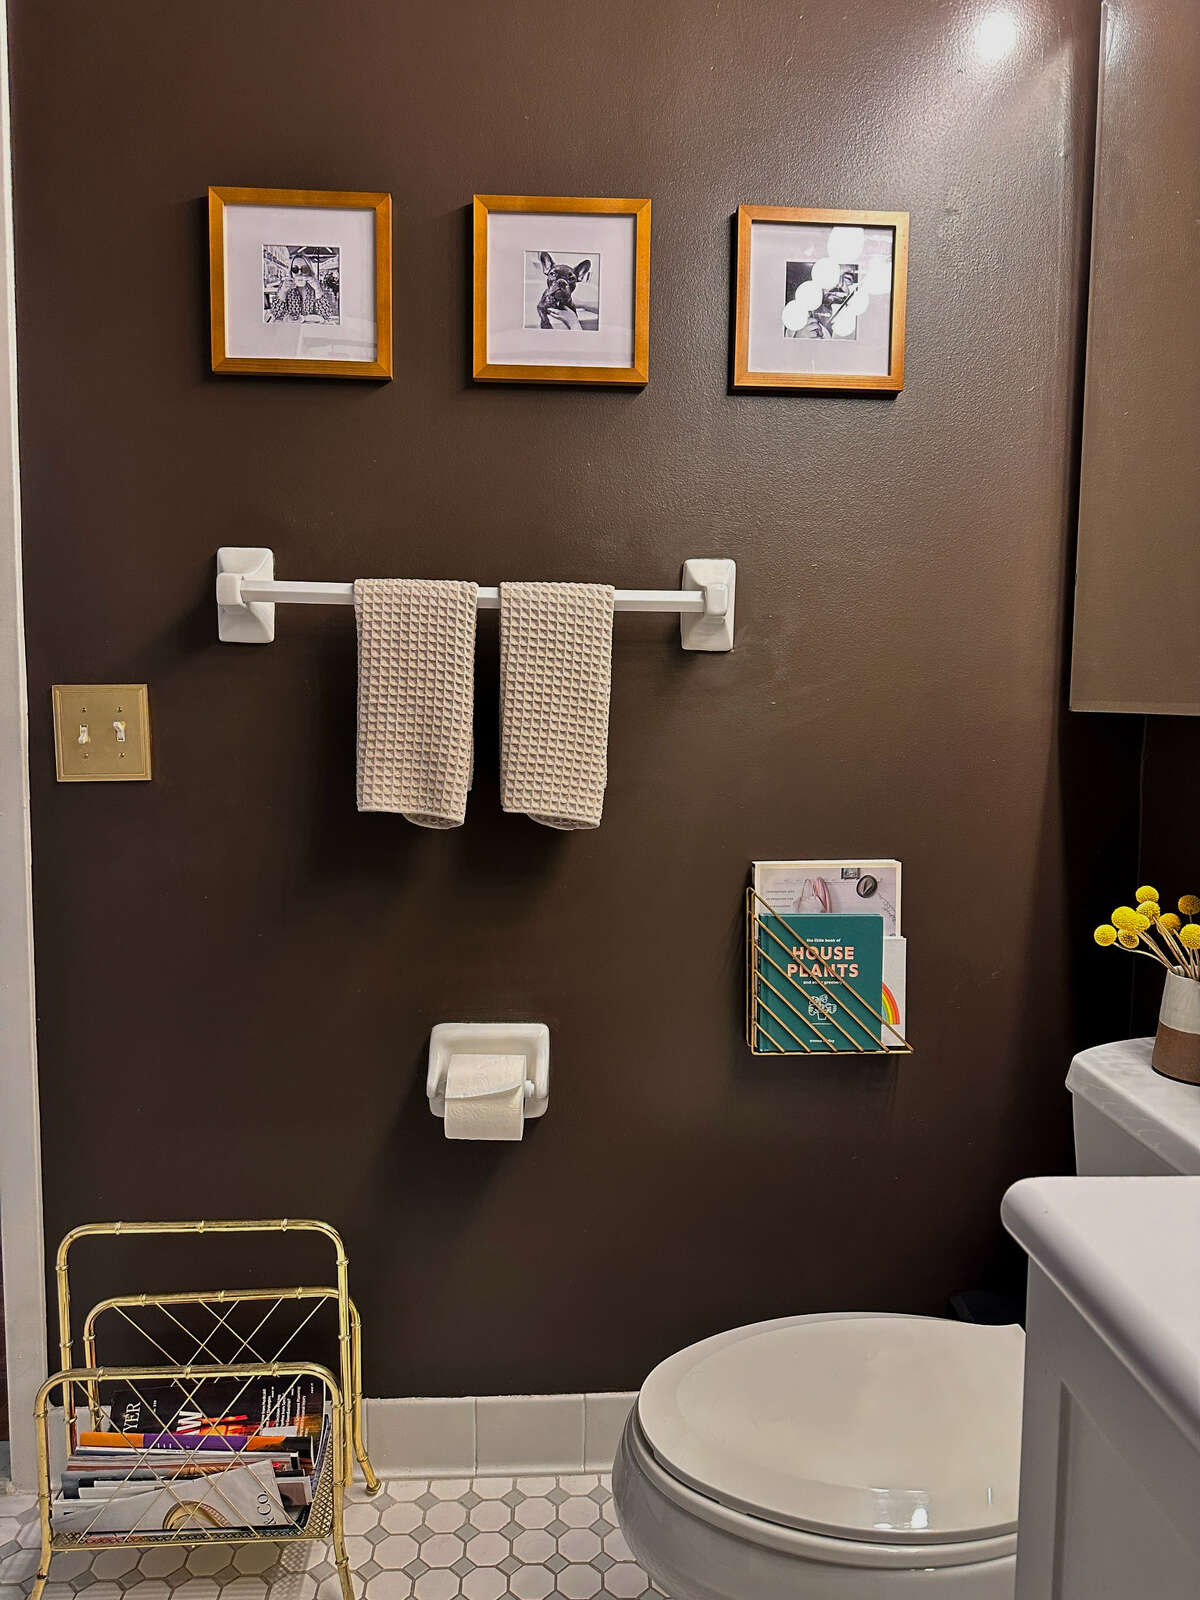 New paint, art and accessories made a big difference in Caroline Mullen's rental bathroom in New Jersey.